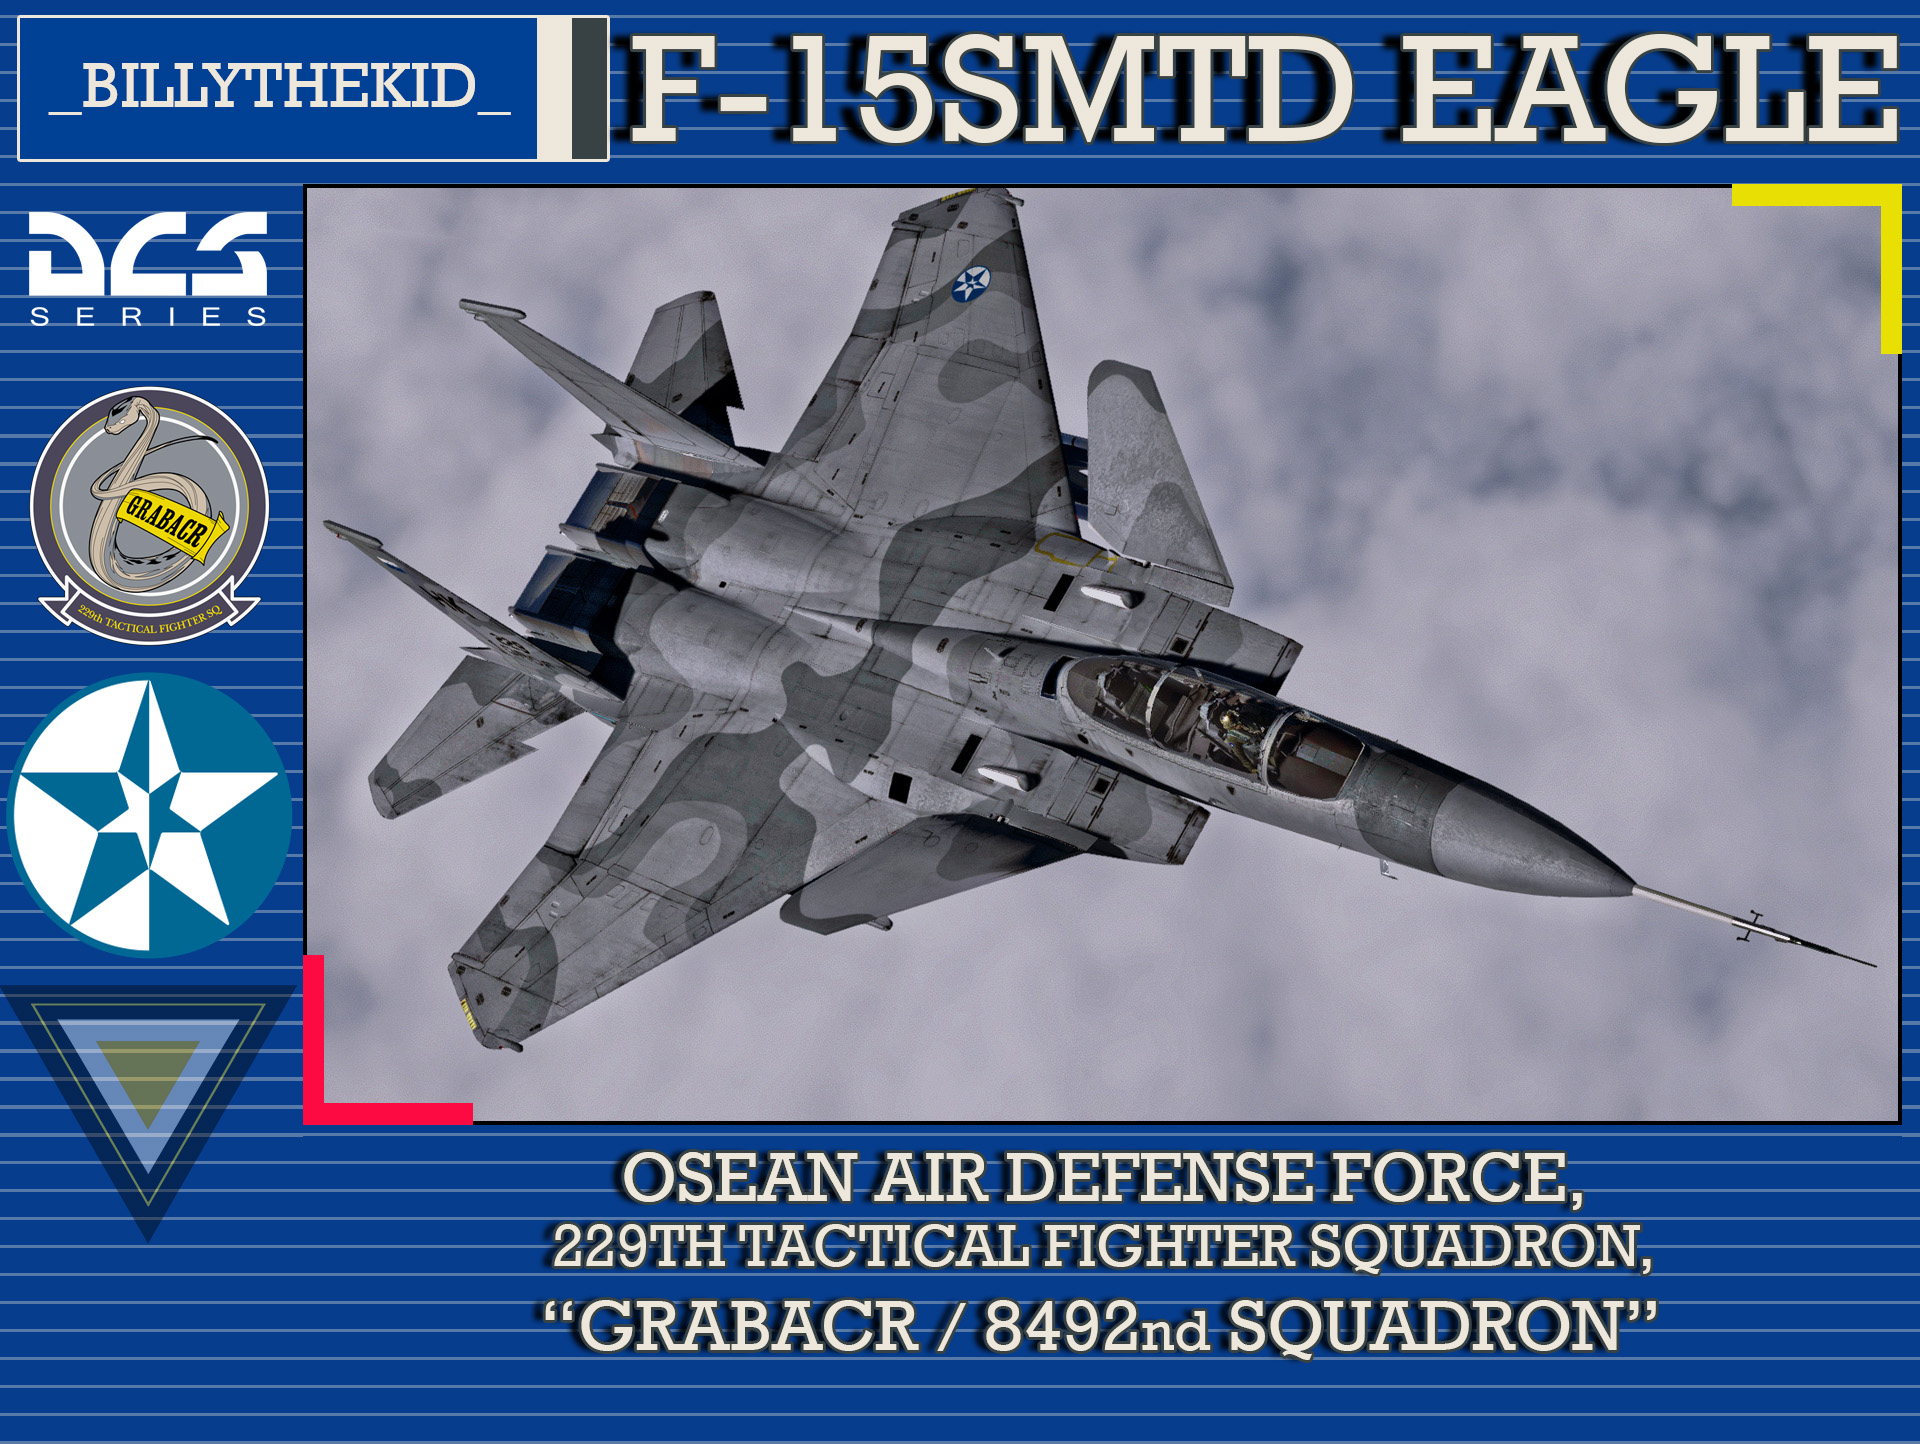 Ace Combat - Osean Air Defense Force 229th TFS "Grabacr / 8492nd Squadron" F-15 S/MTD